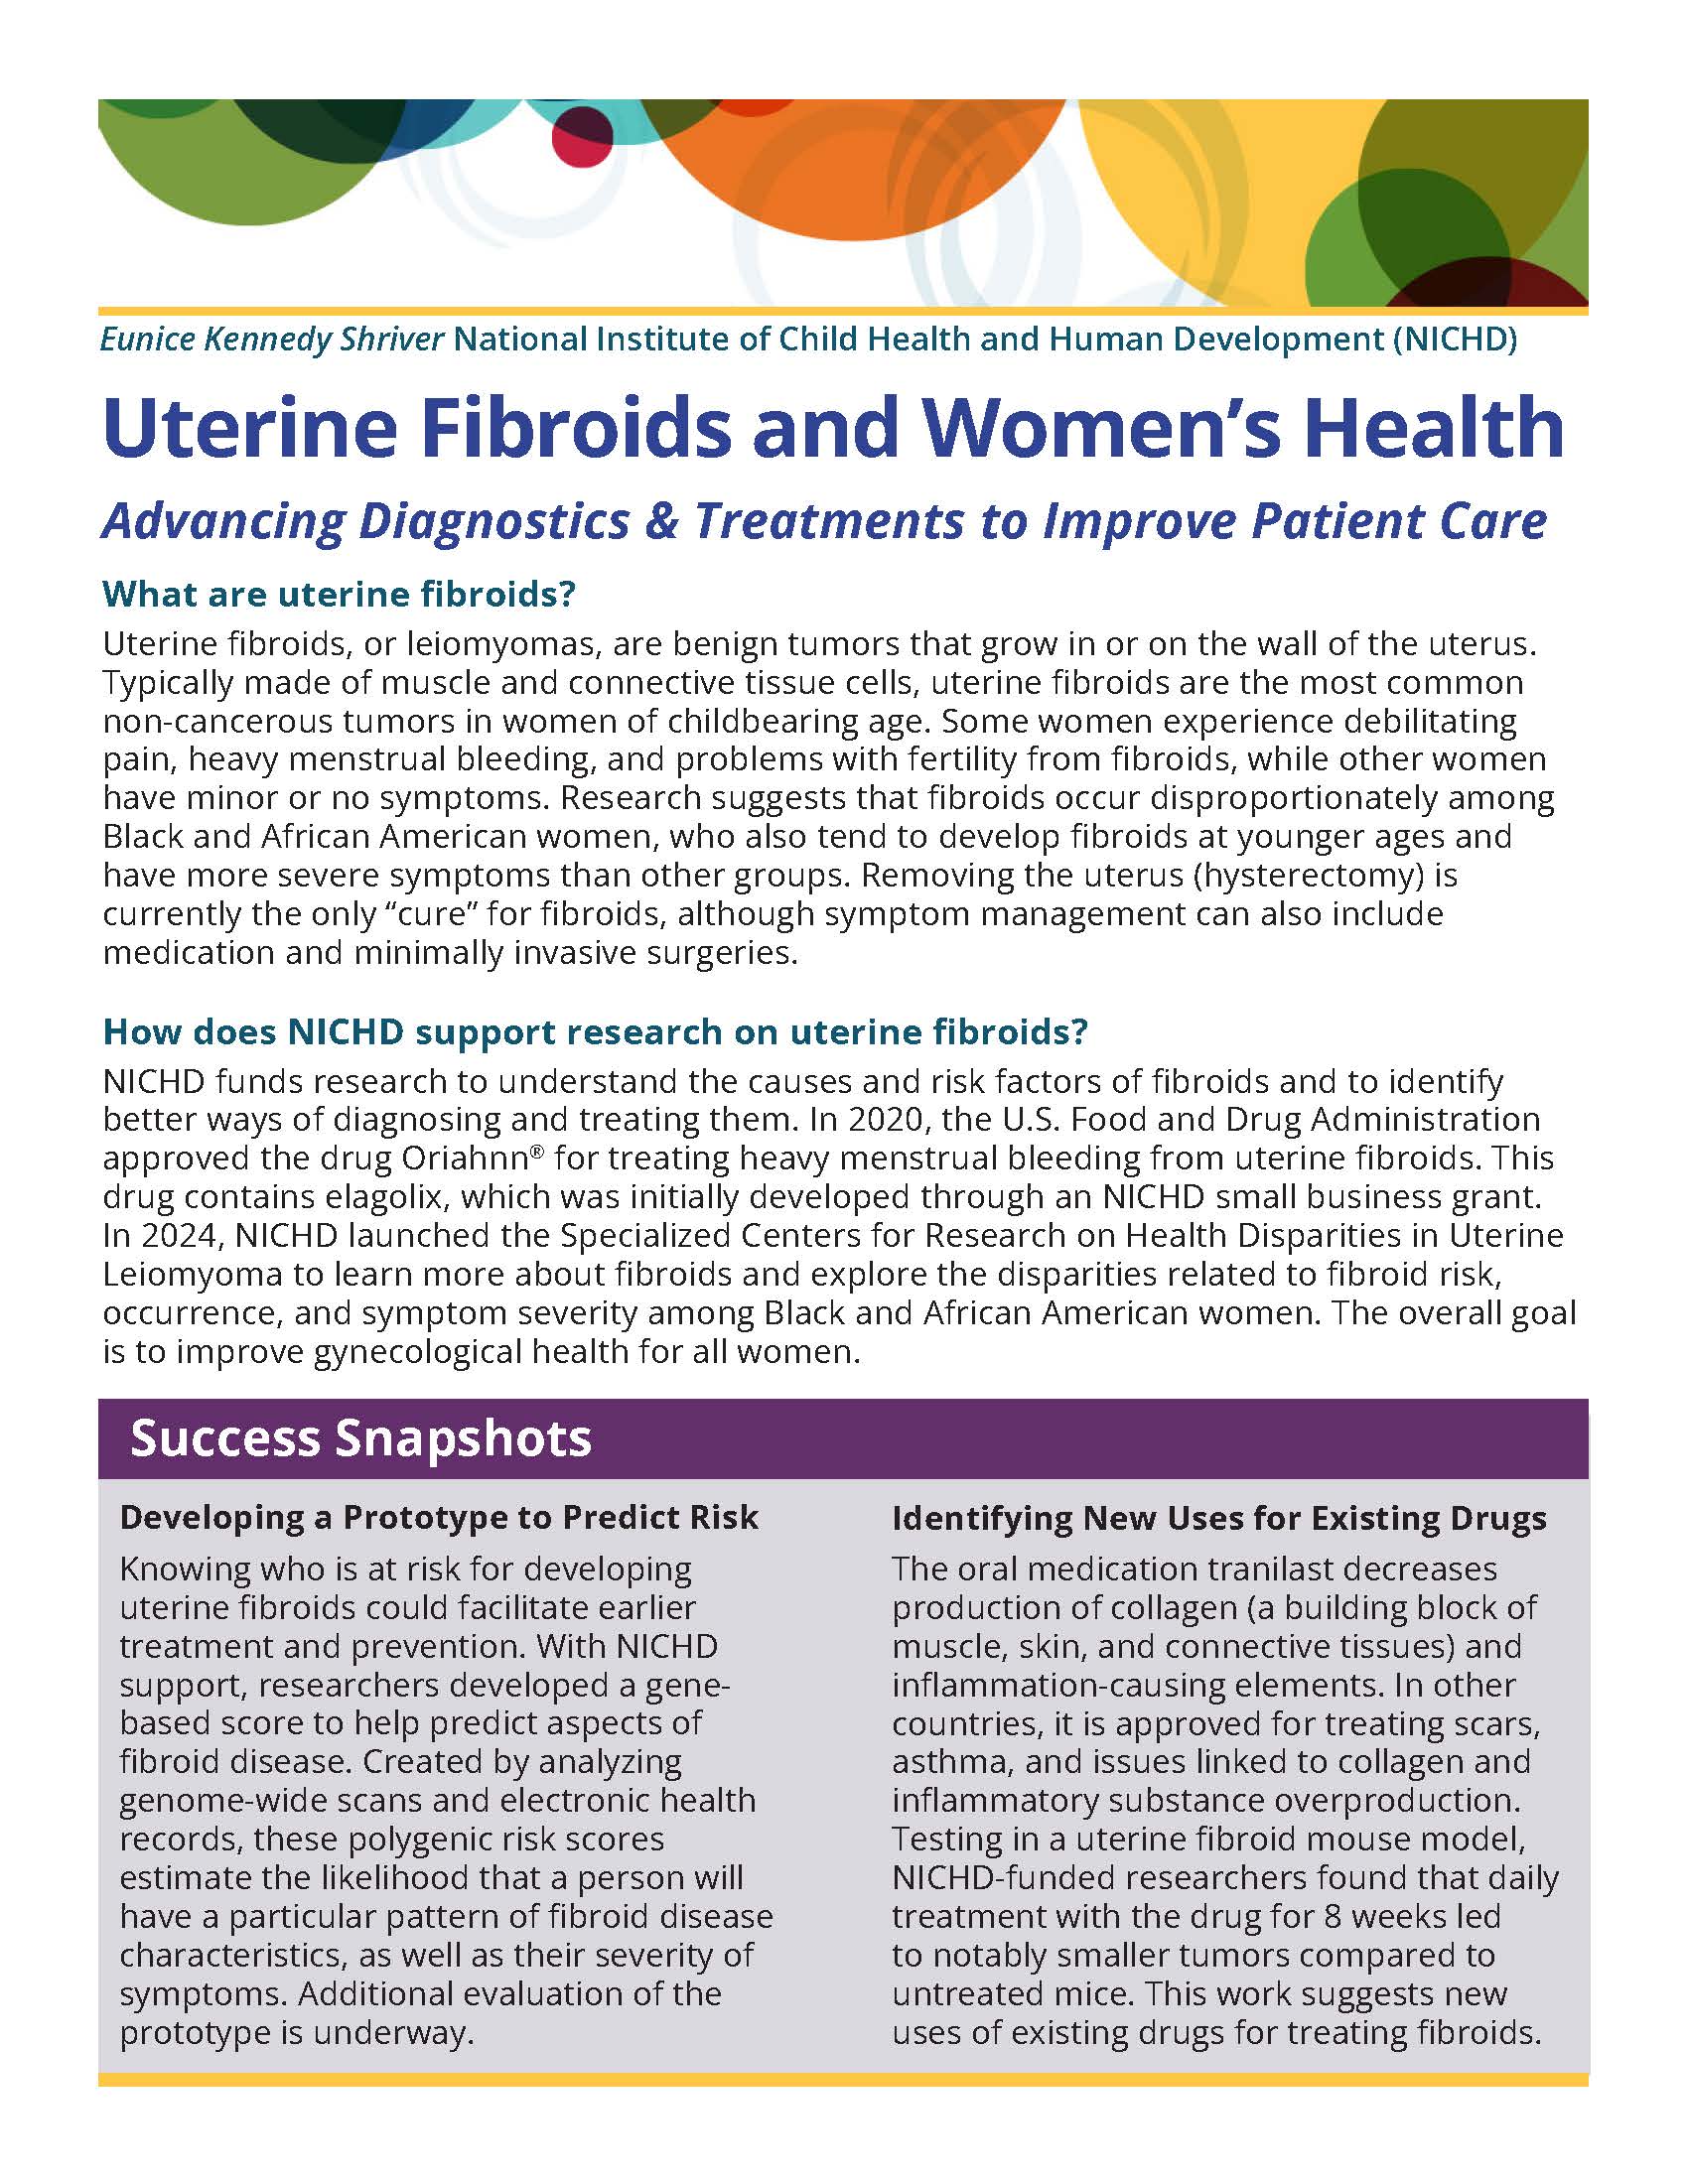 Front side of the NICHD Uterine Fibroids and Women's Health Fact Sheet